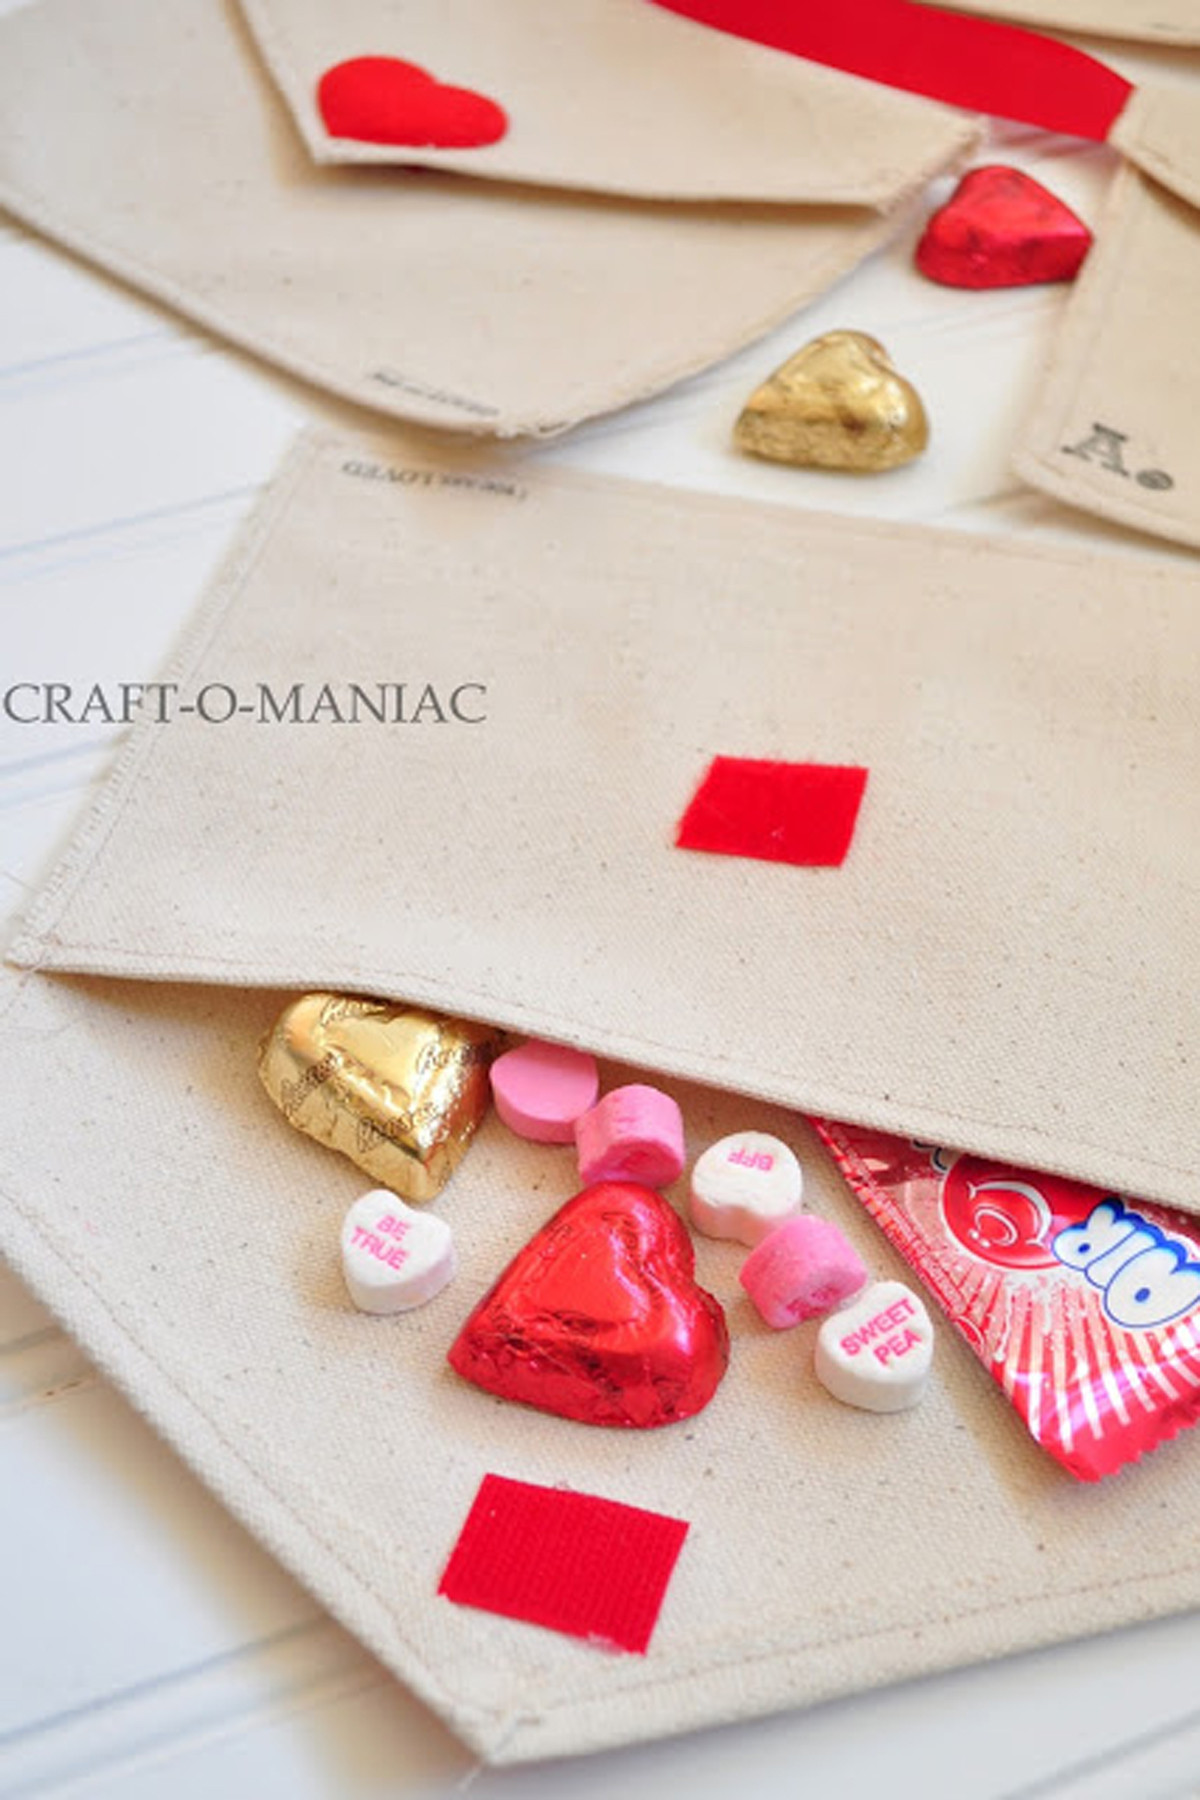 Diy Ideas for Valentines Day Unique 42 Valentine S Day Crafts and Diy Ideas Best Ideas for